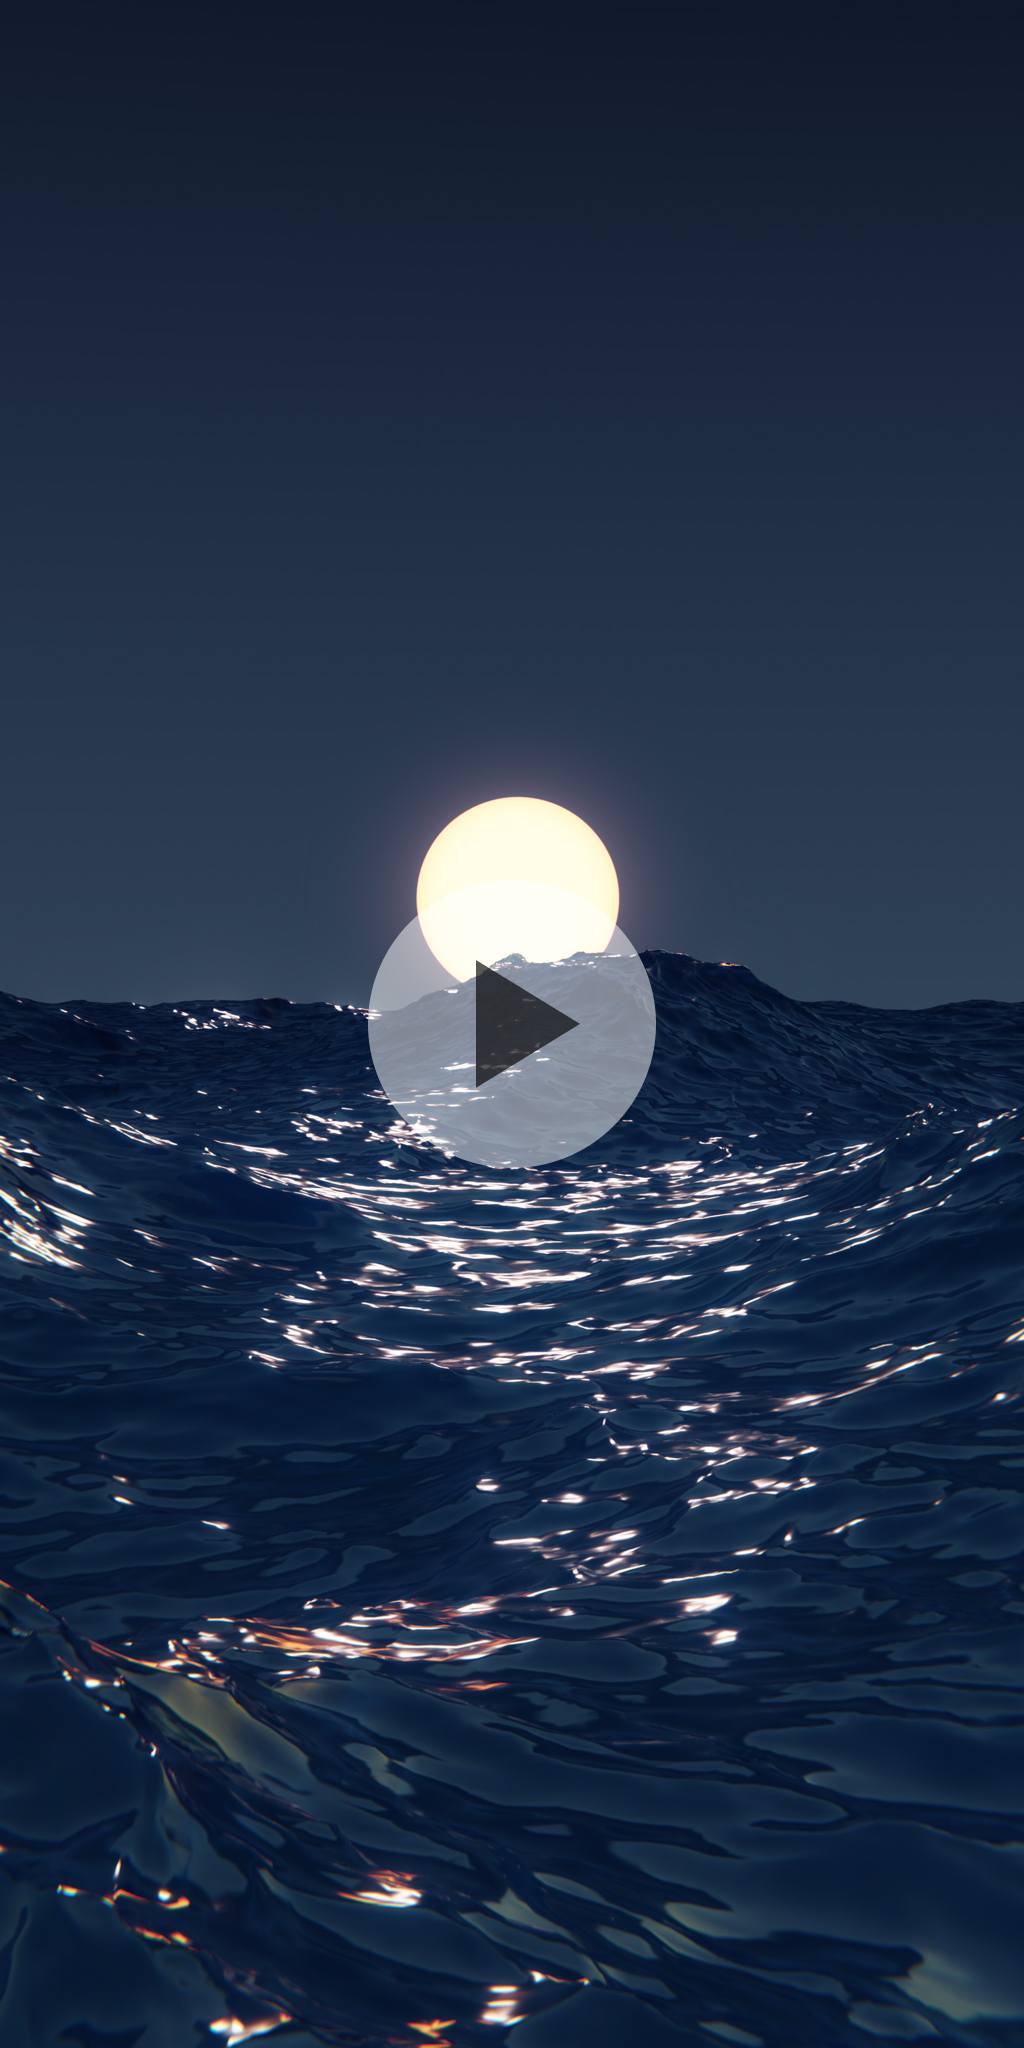 Water and moon. Live wallpaper for Samsung phones